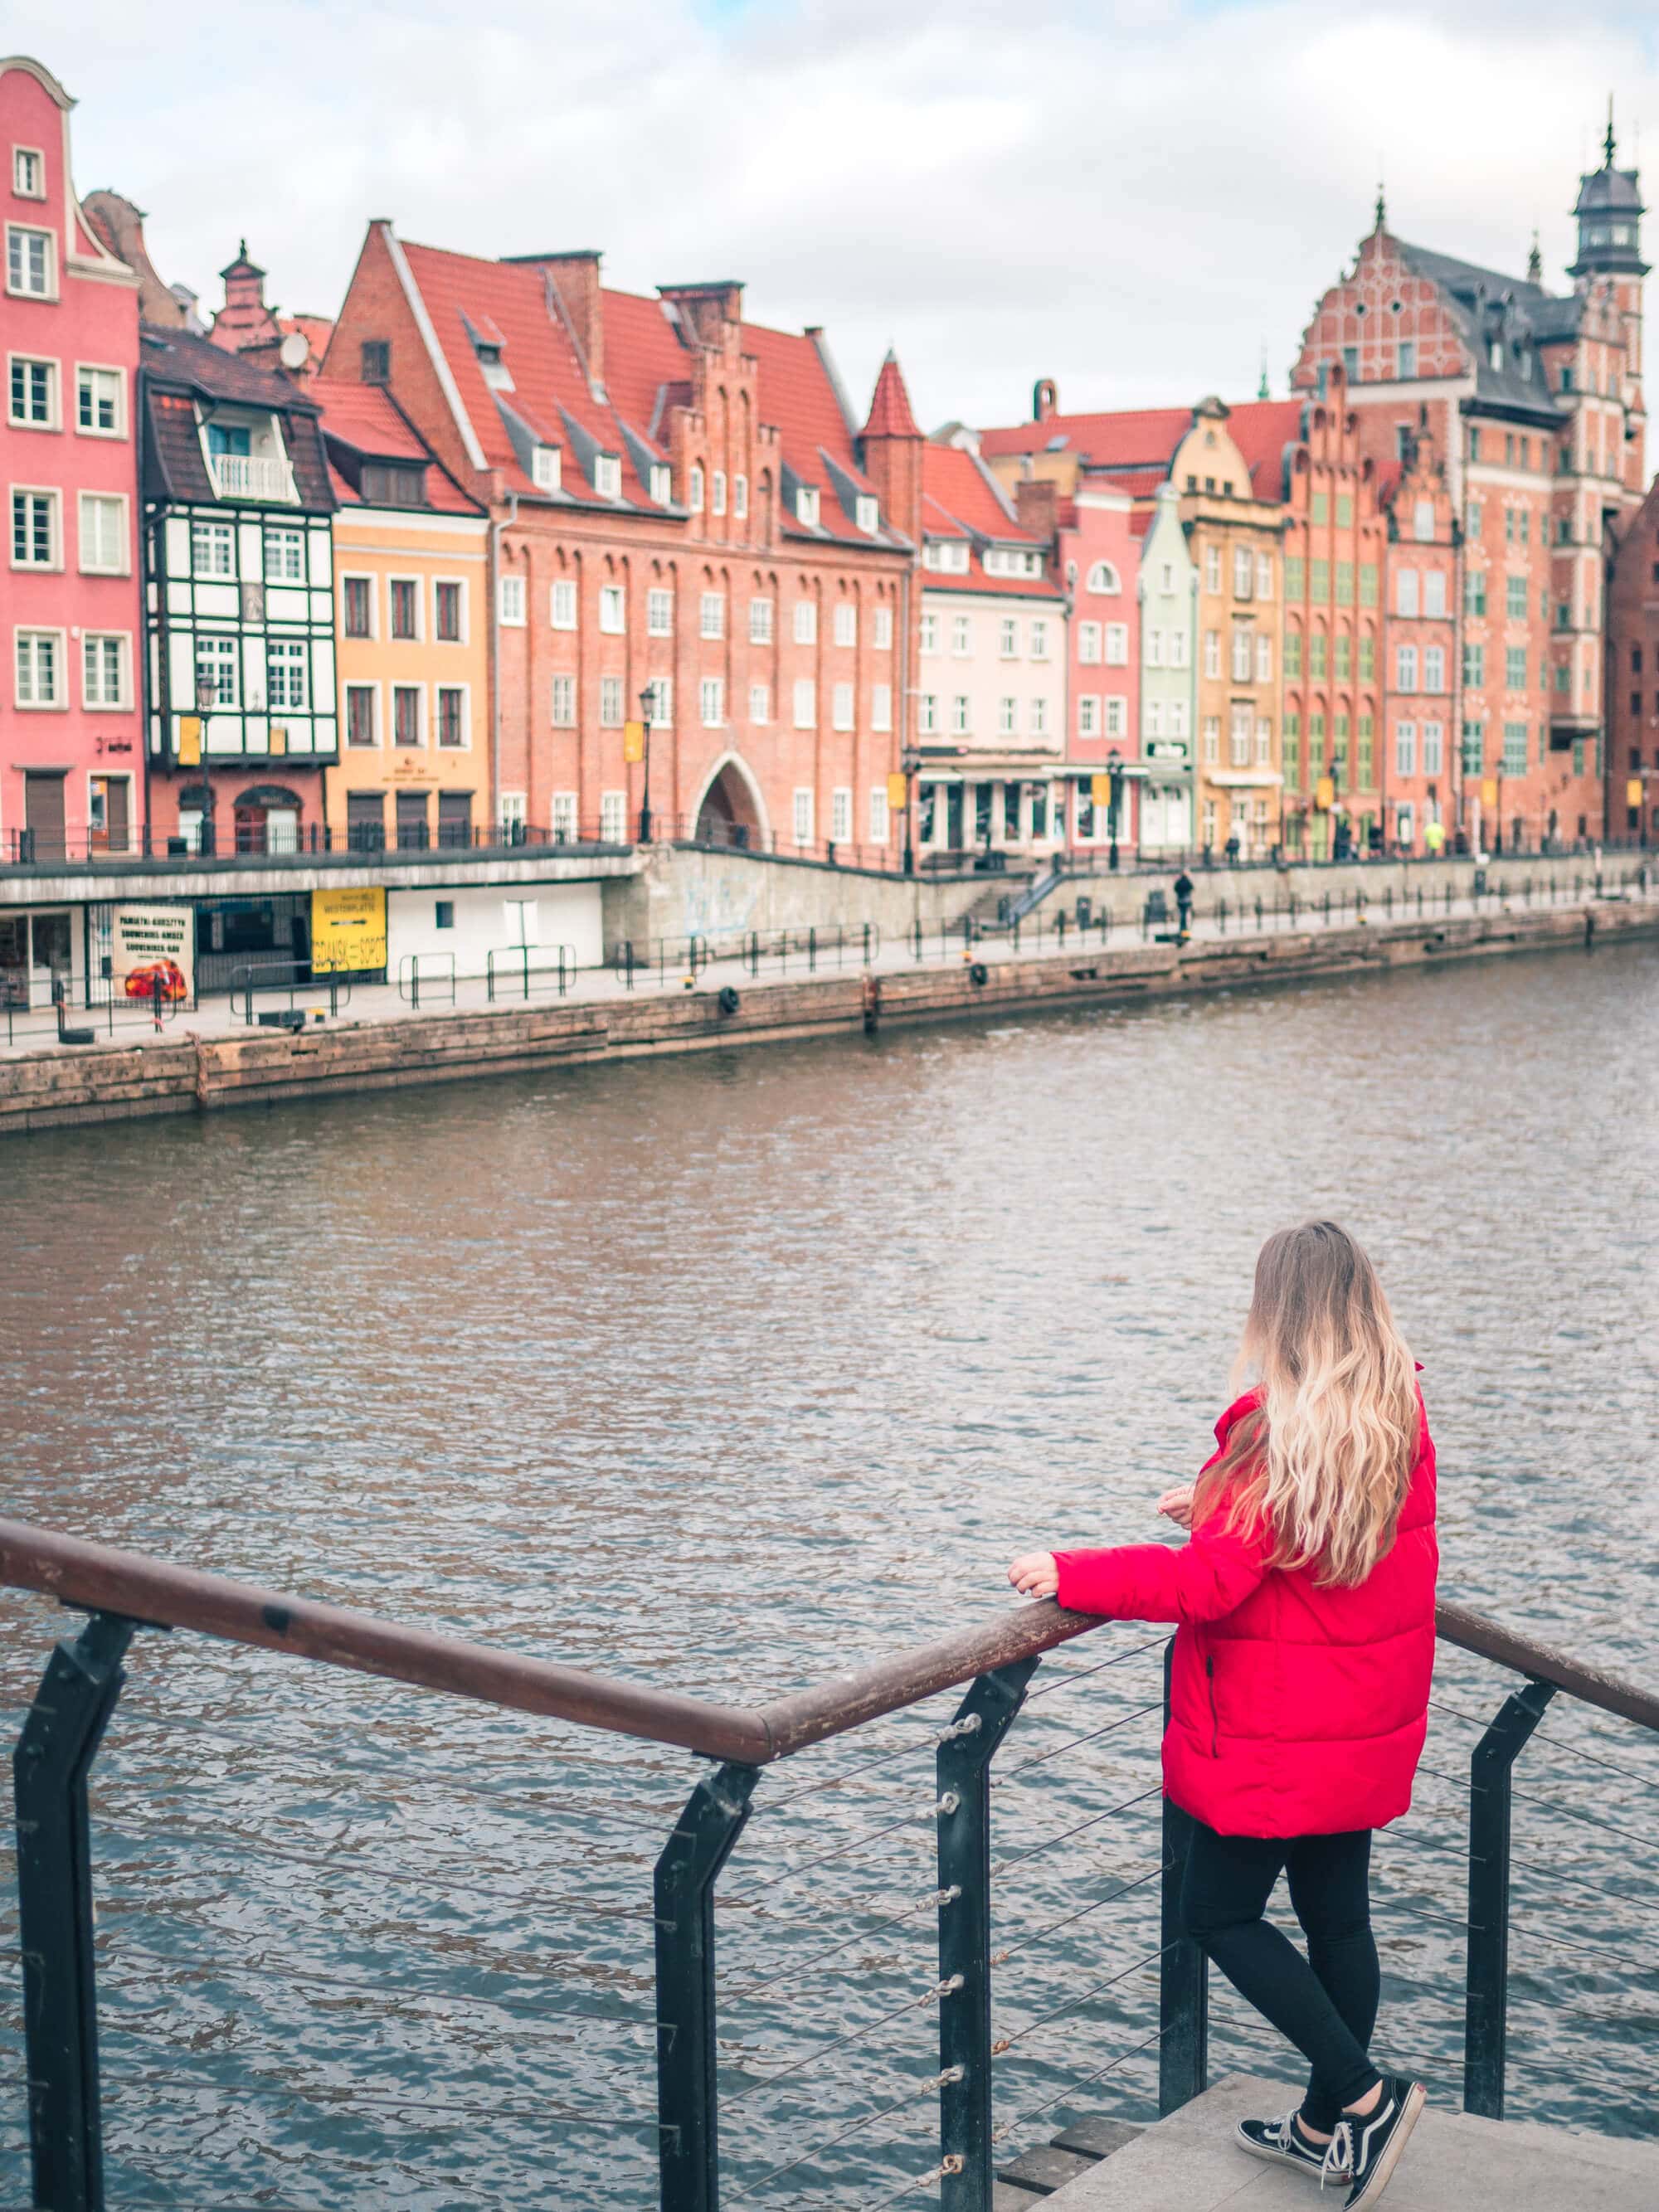 Girl with long hair, wearing a red down jacket and black pants, looking out over Gdansk River, with a row of colorful houses on the other side, a must during your 2 days in Gdansk.